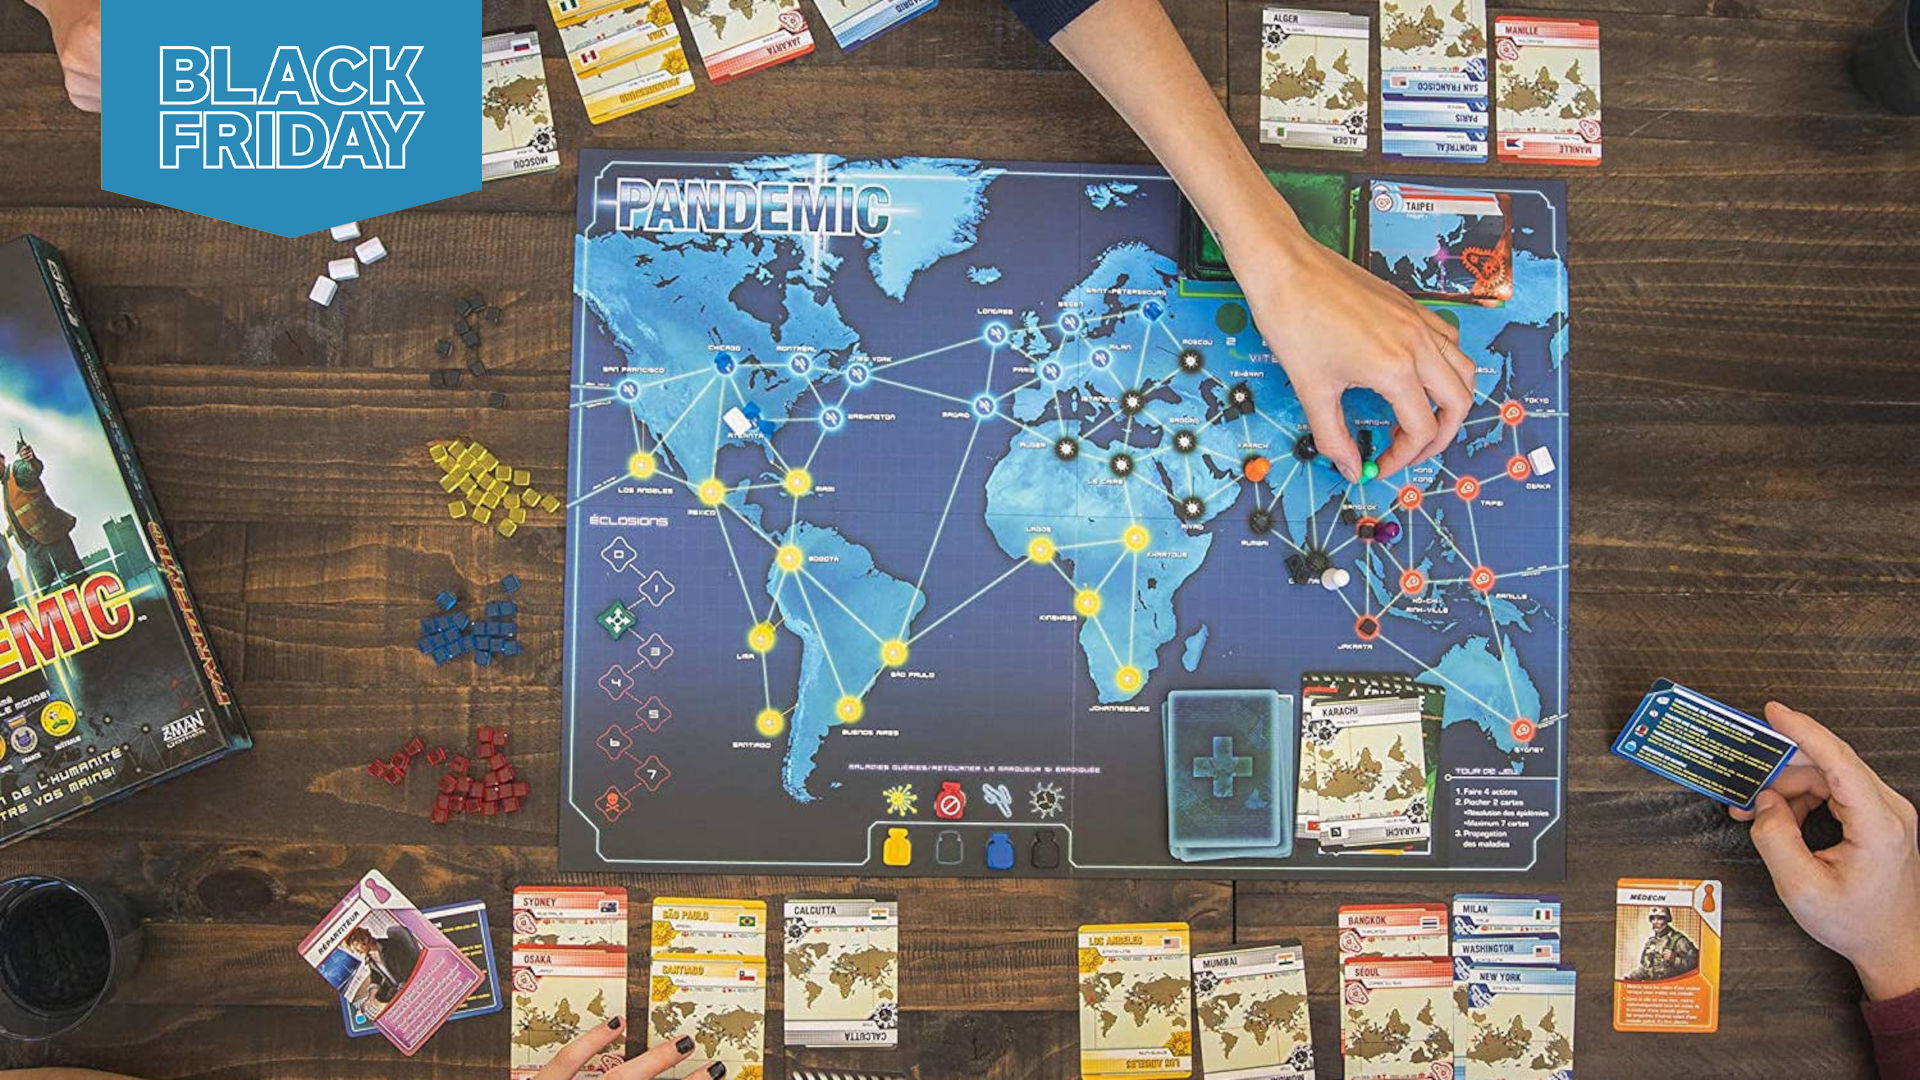 Pandemic, one of the best gateway games